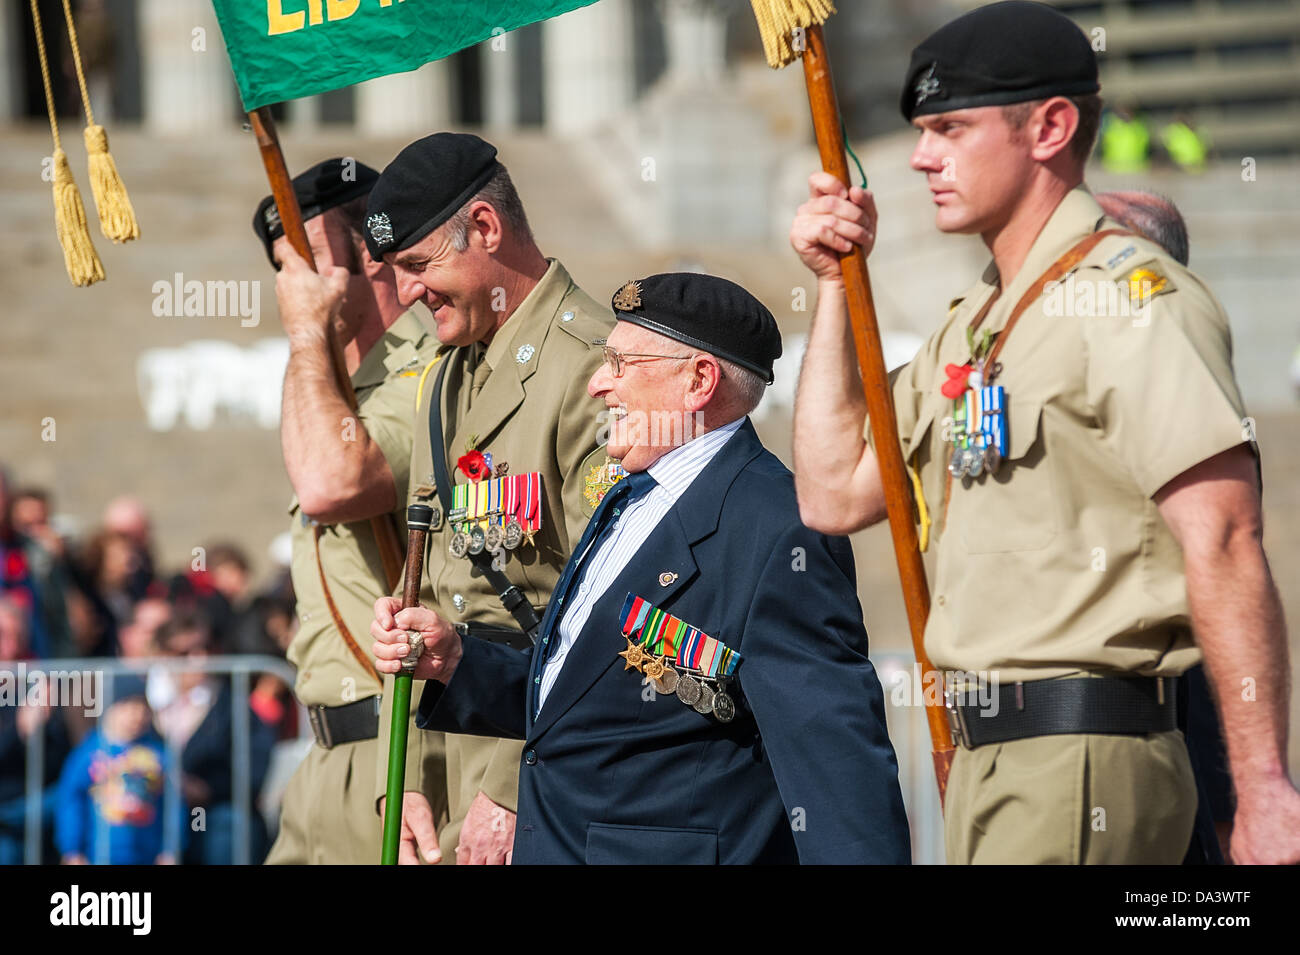 Thousands attend Anzac Day marches across Australia to pay respects to service men and women and fallen war heroes. Stock Photo